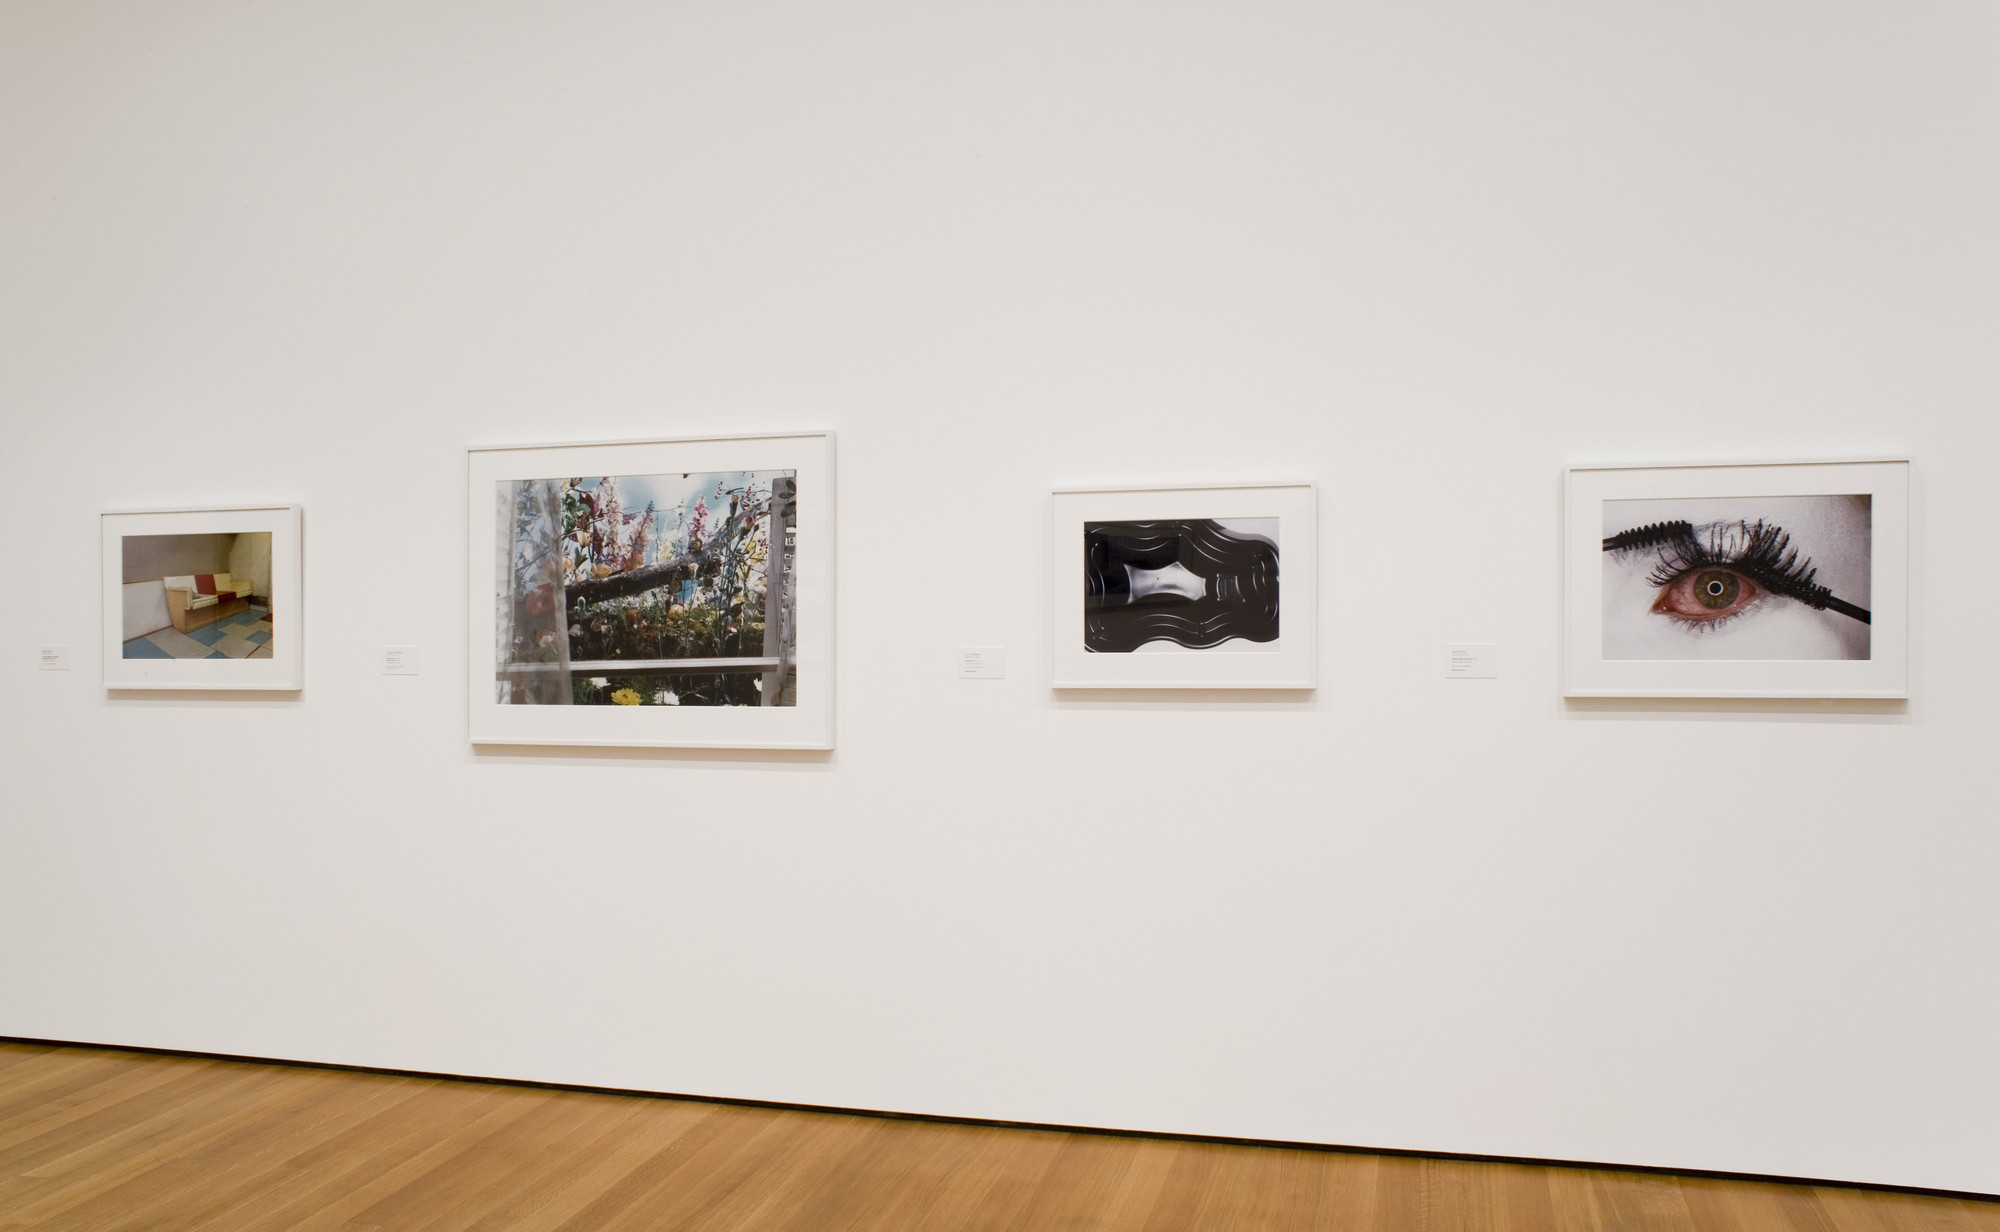 Installation view of the exhibition, "Photography Menschel | MoMA